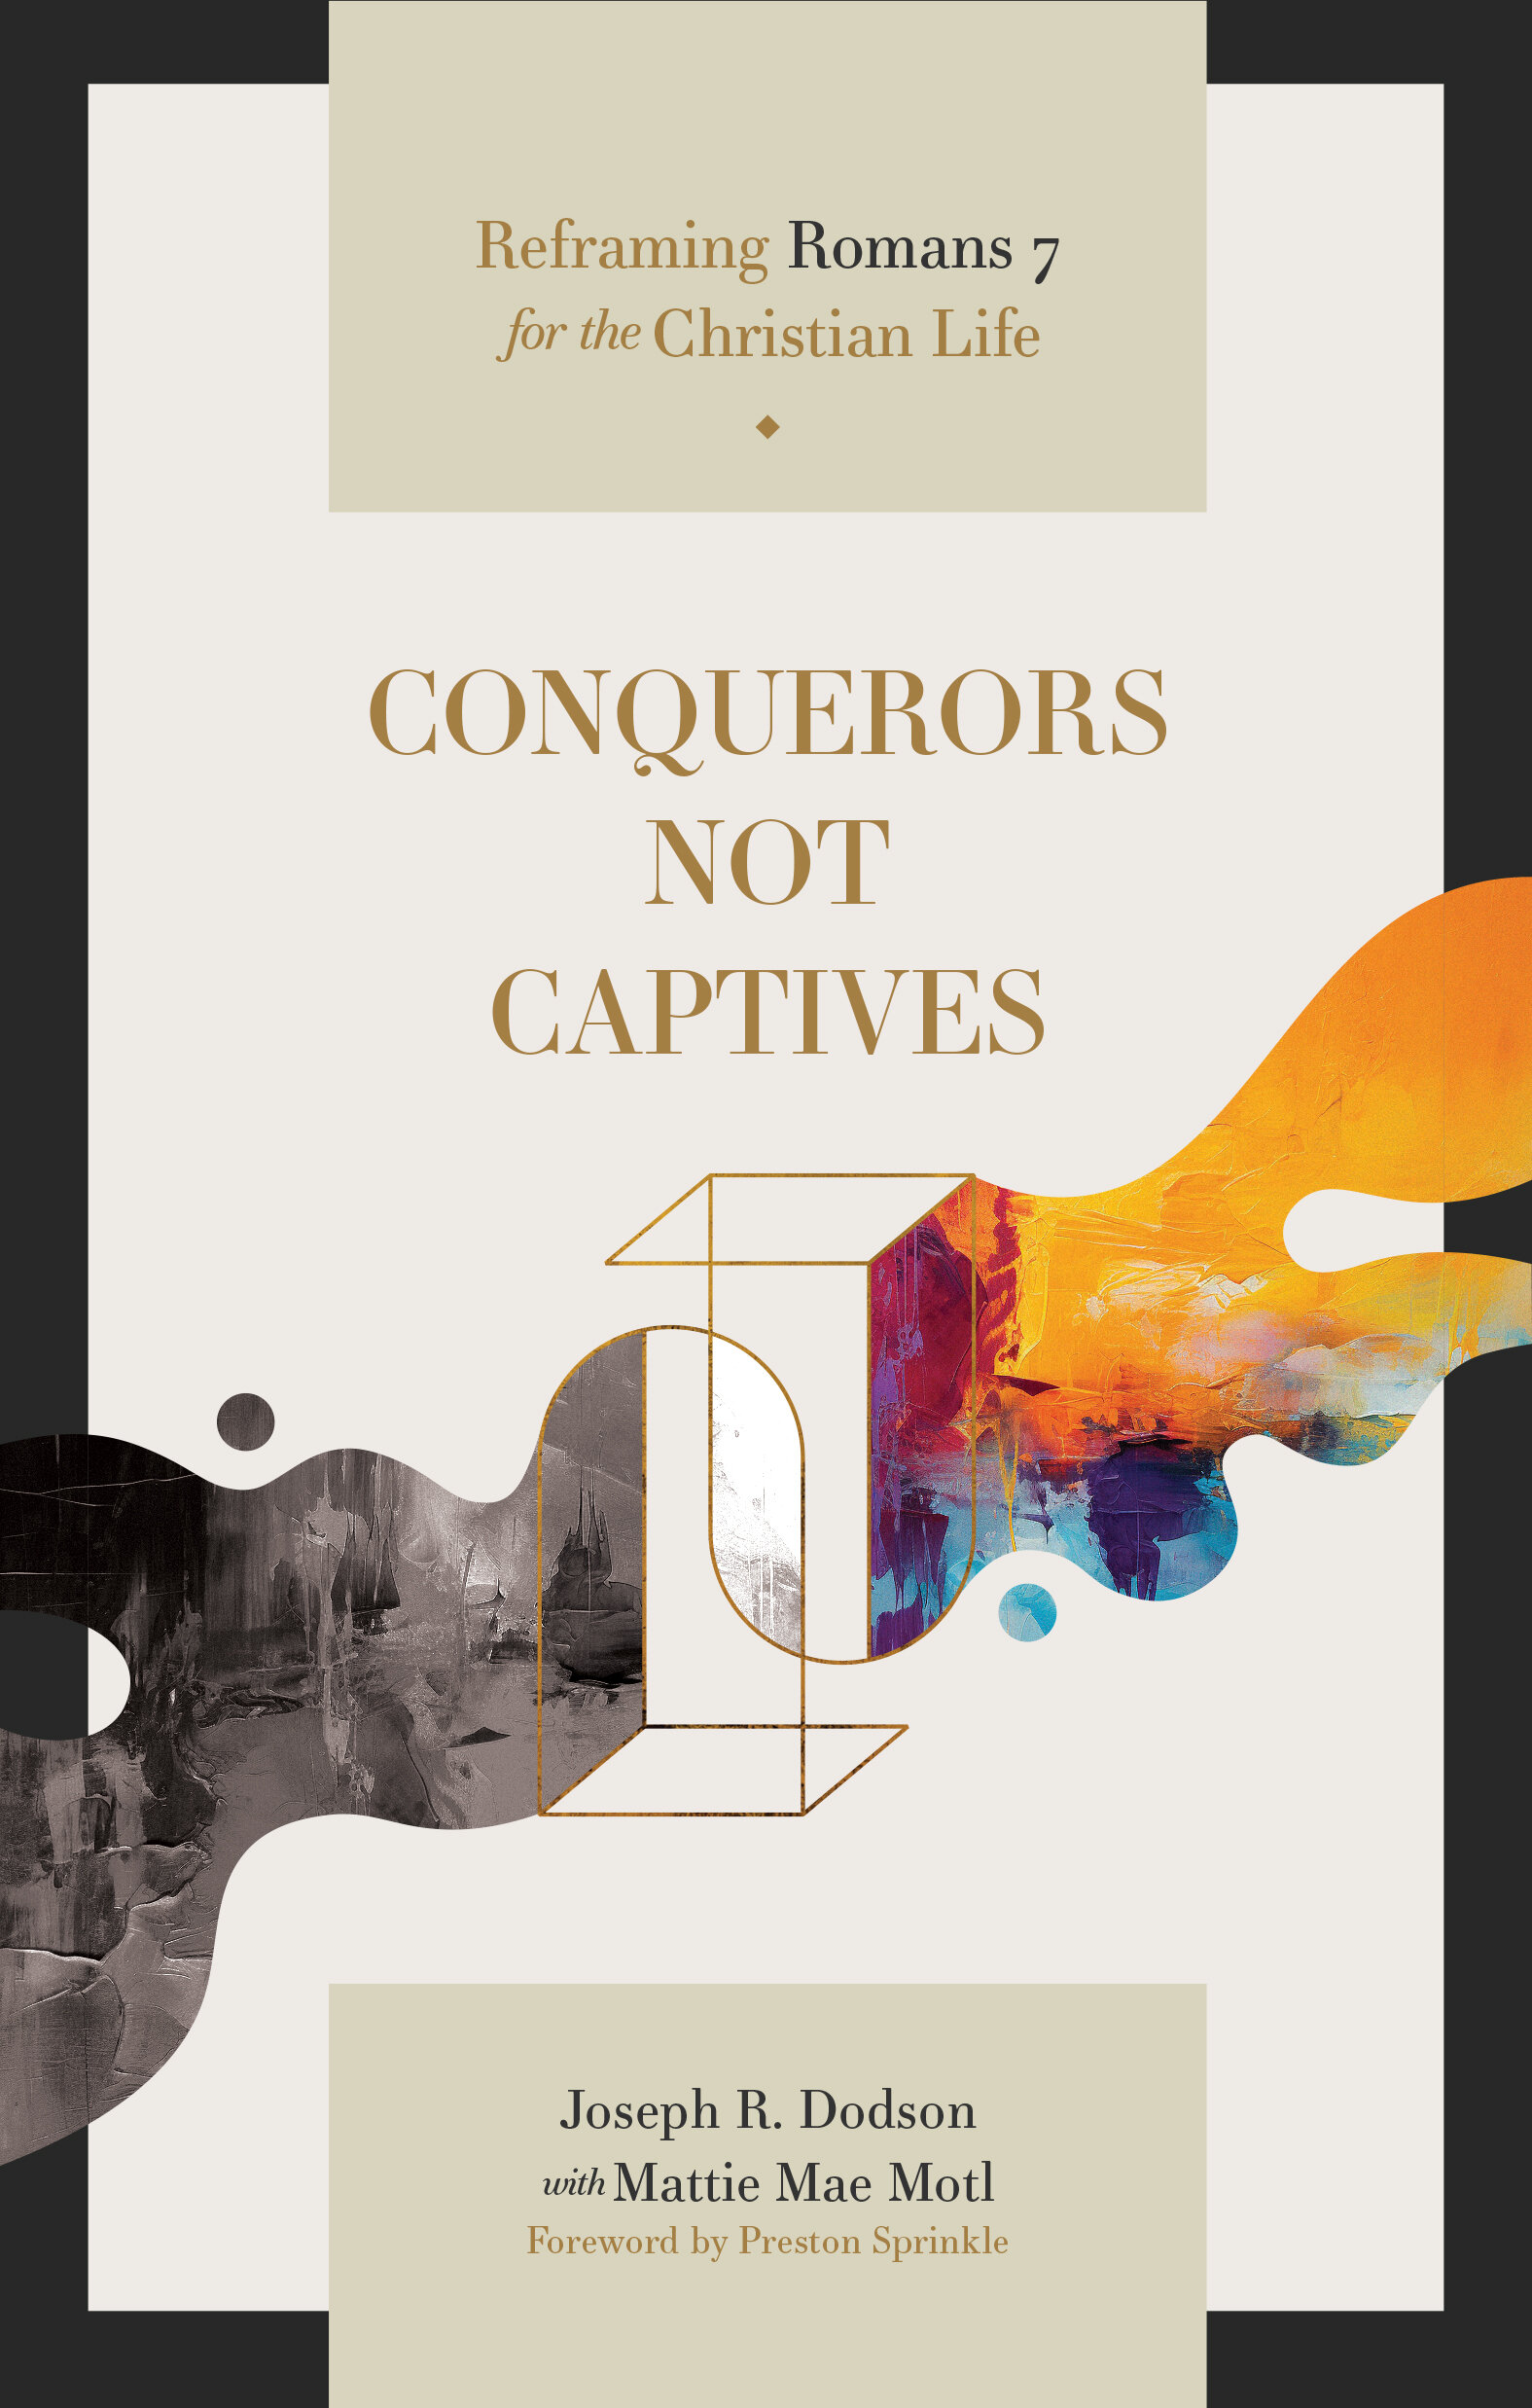 Conquerors Not Captives: Reframing Romans 7 for the Christian Life